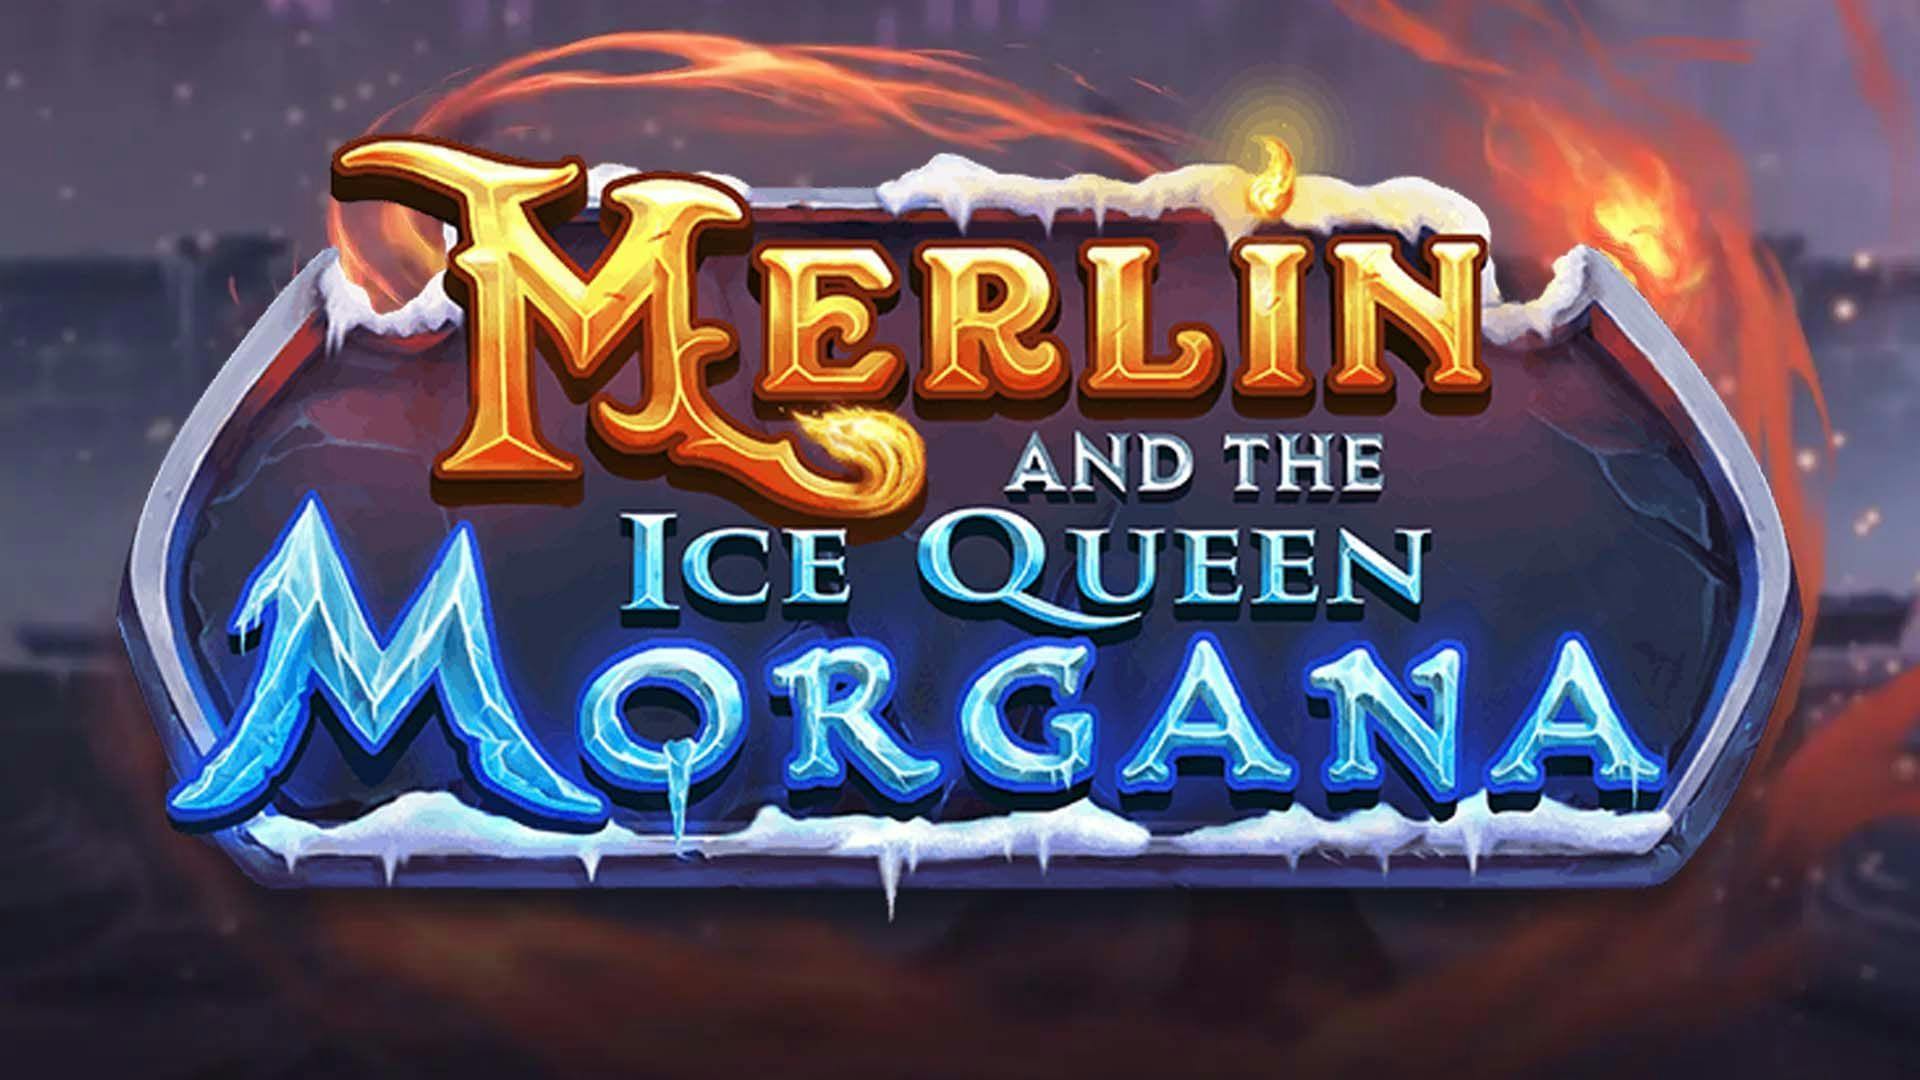 Merlin And The Ice Queen Morgana